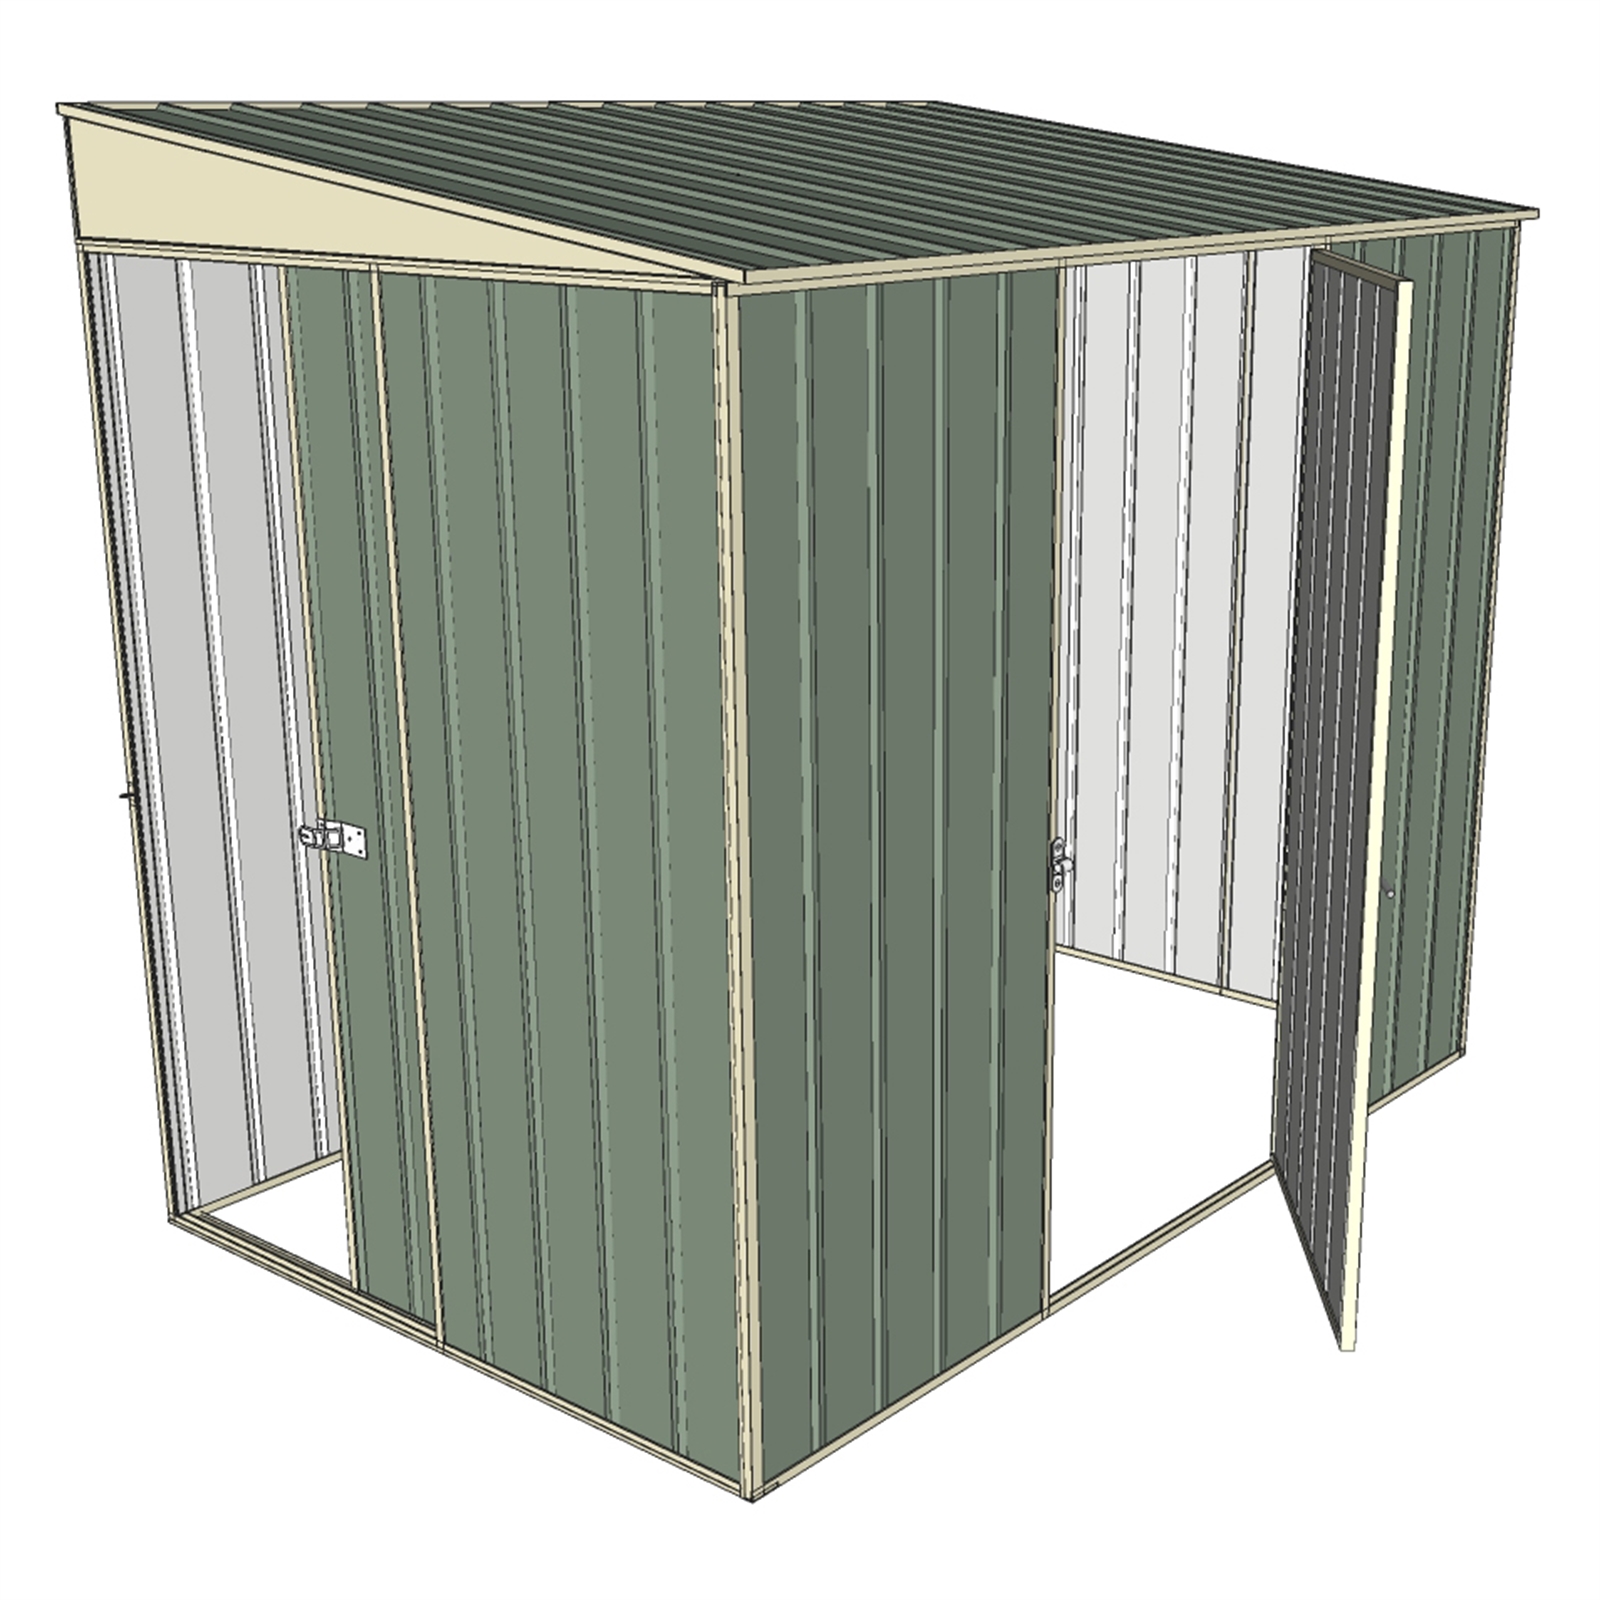 Build-a-Shed 2.3 x 2.0 x 1.5m Green Skillion Two Single Hinged Doors Narrow Shed